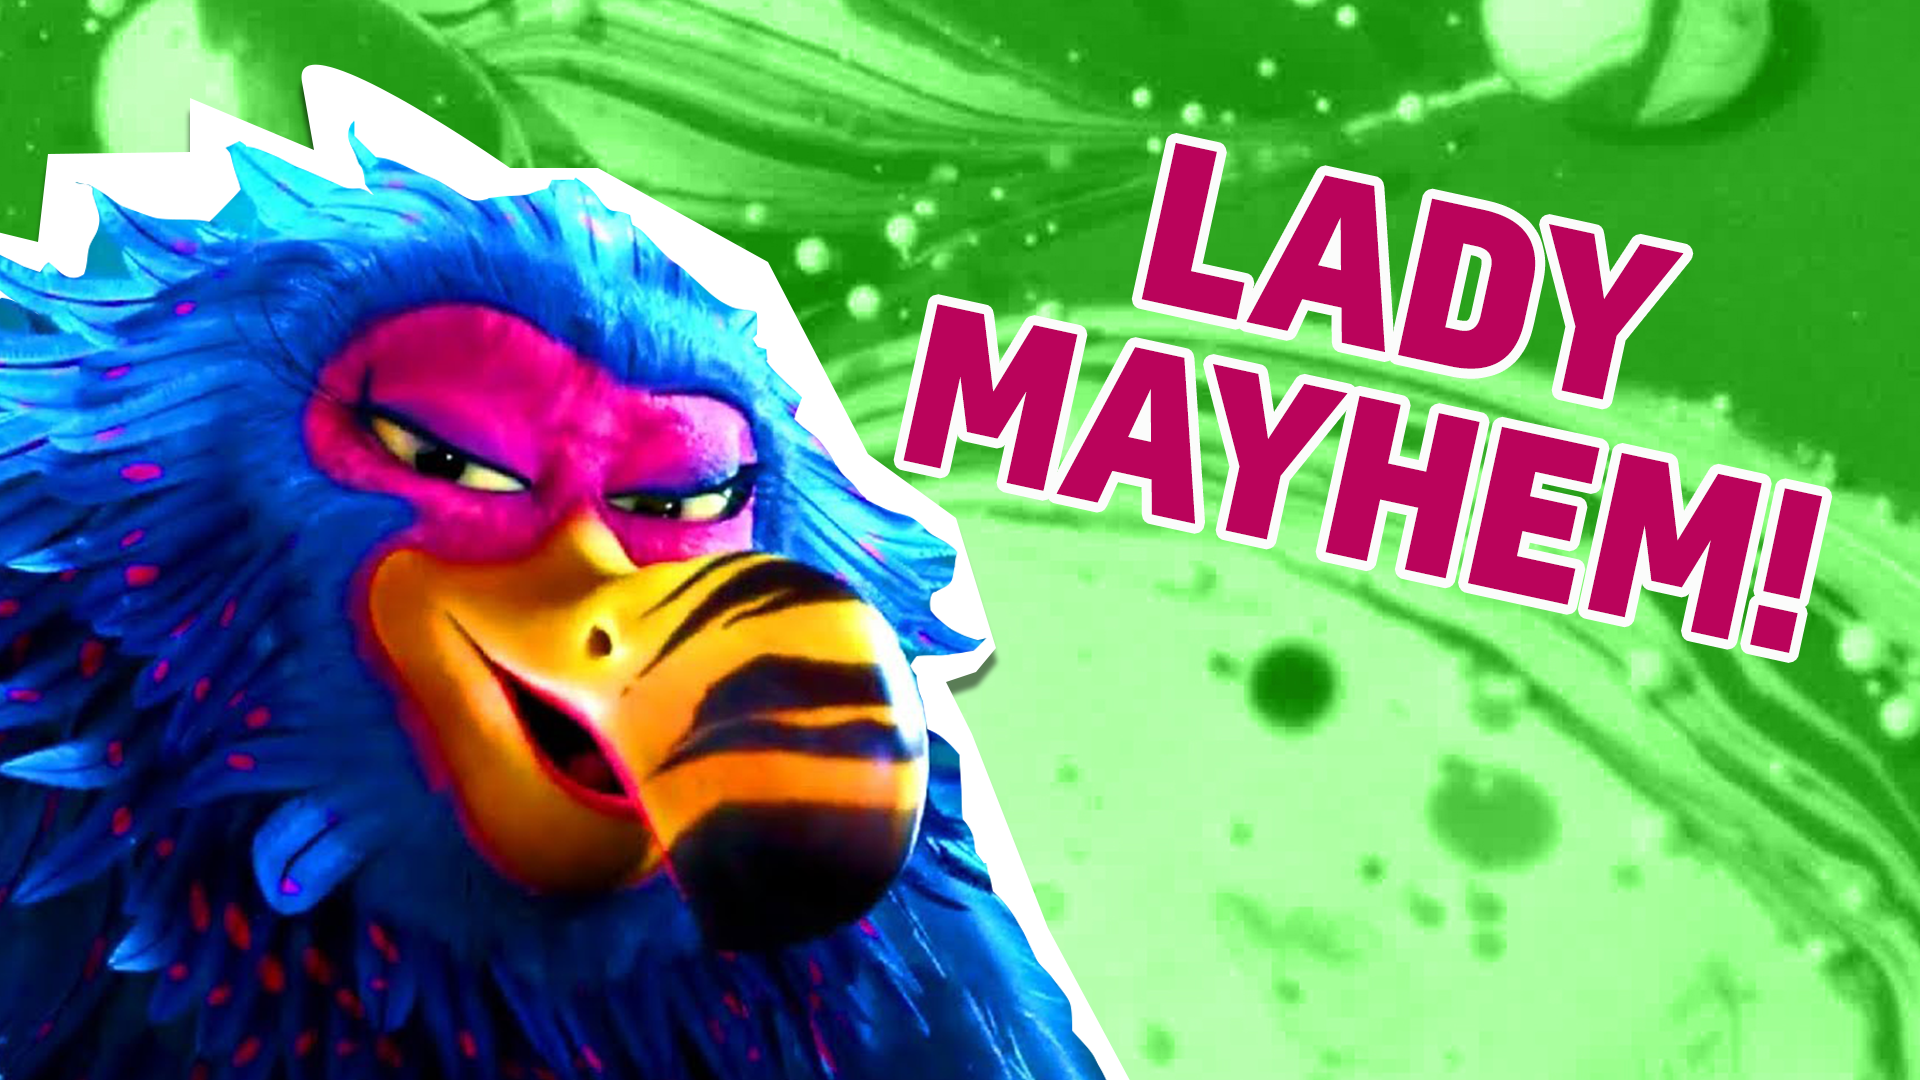 You're just like Lady Mayhem! You're confident, cool and you always know how to get what you want!